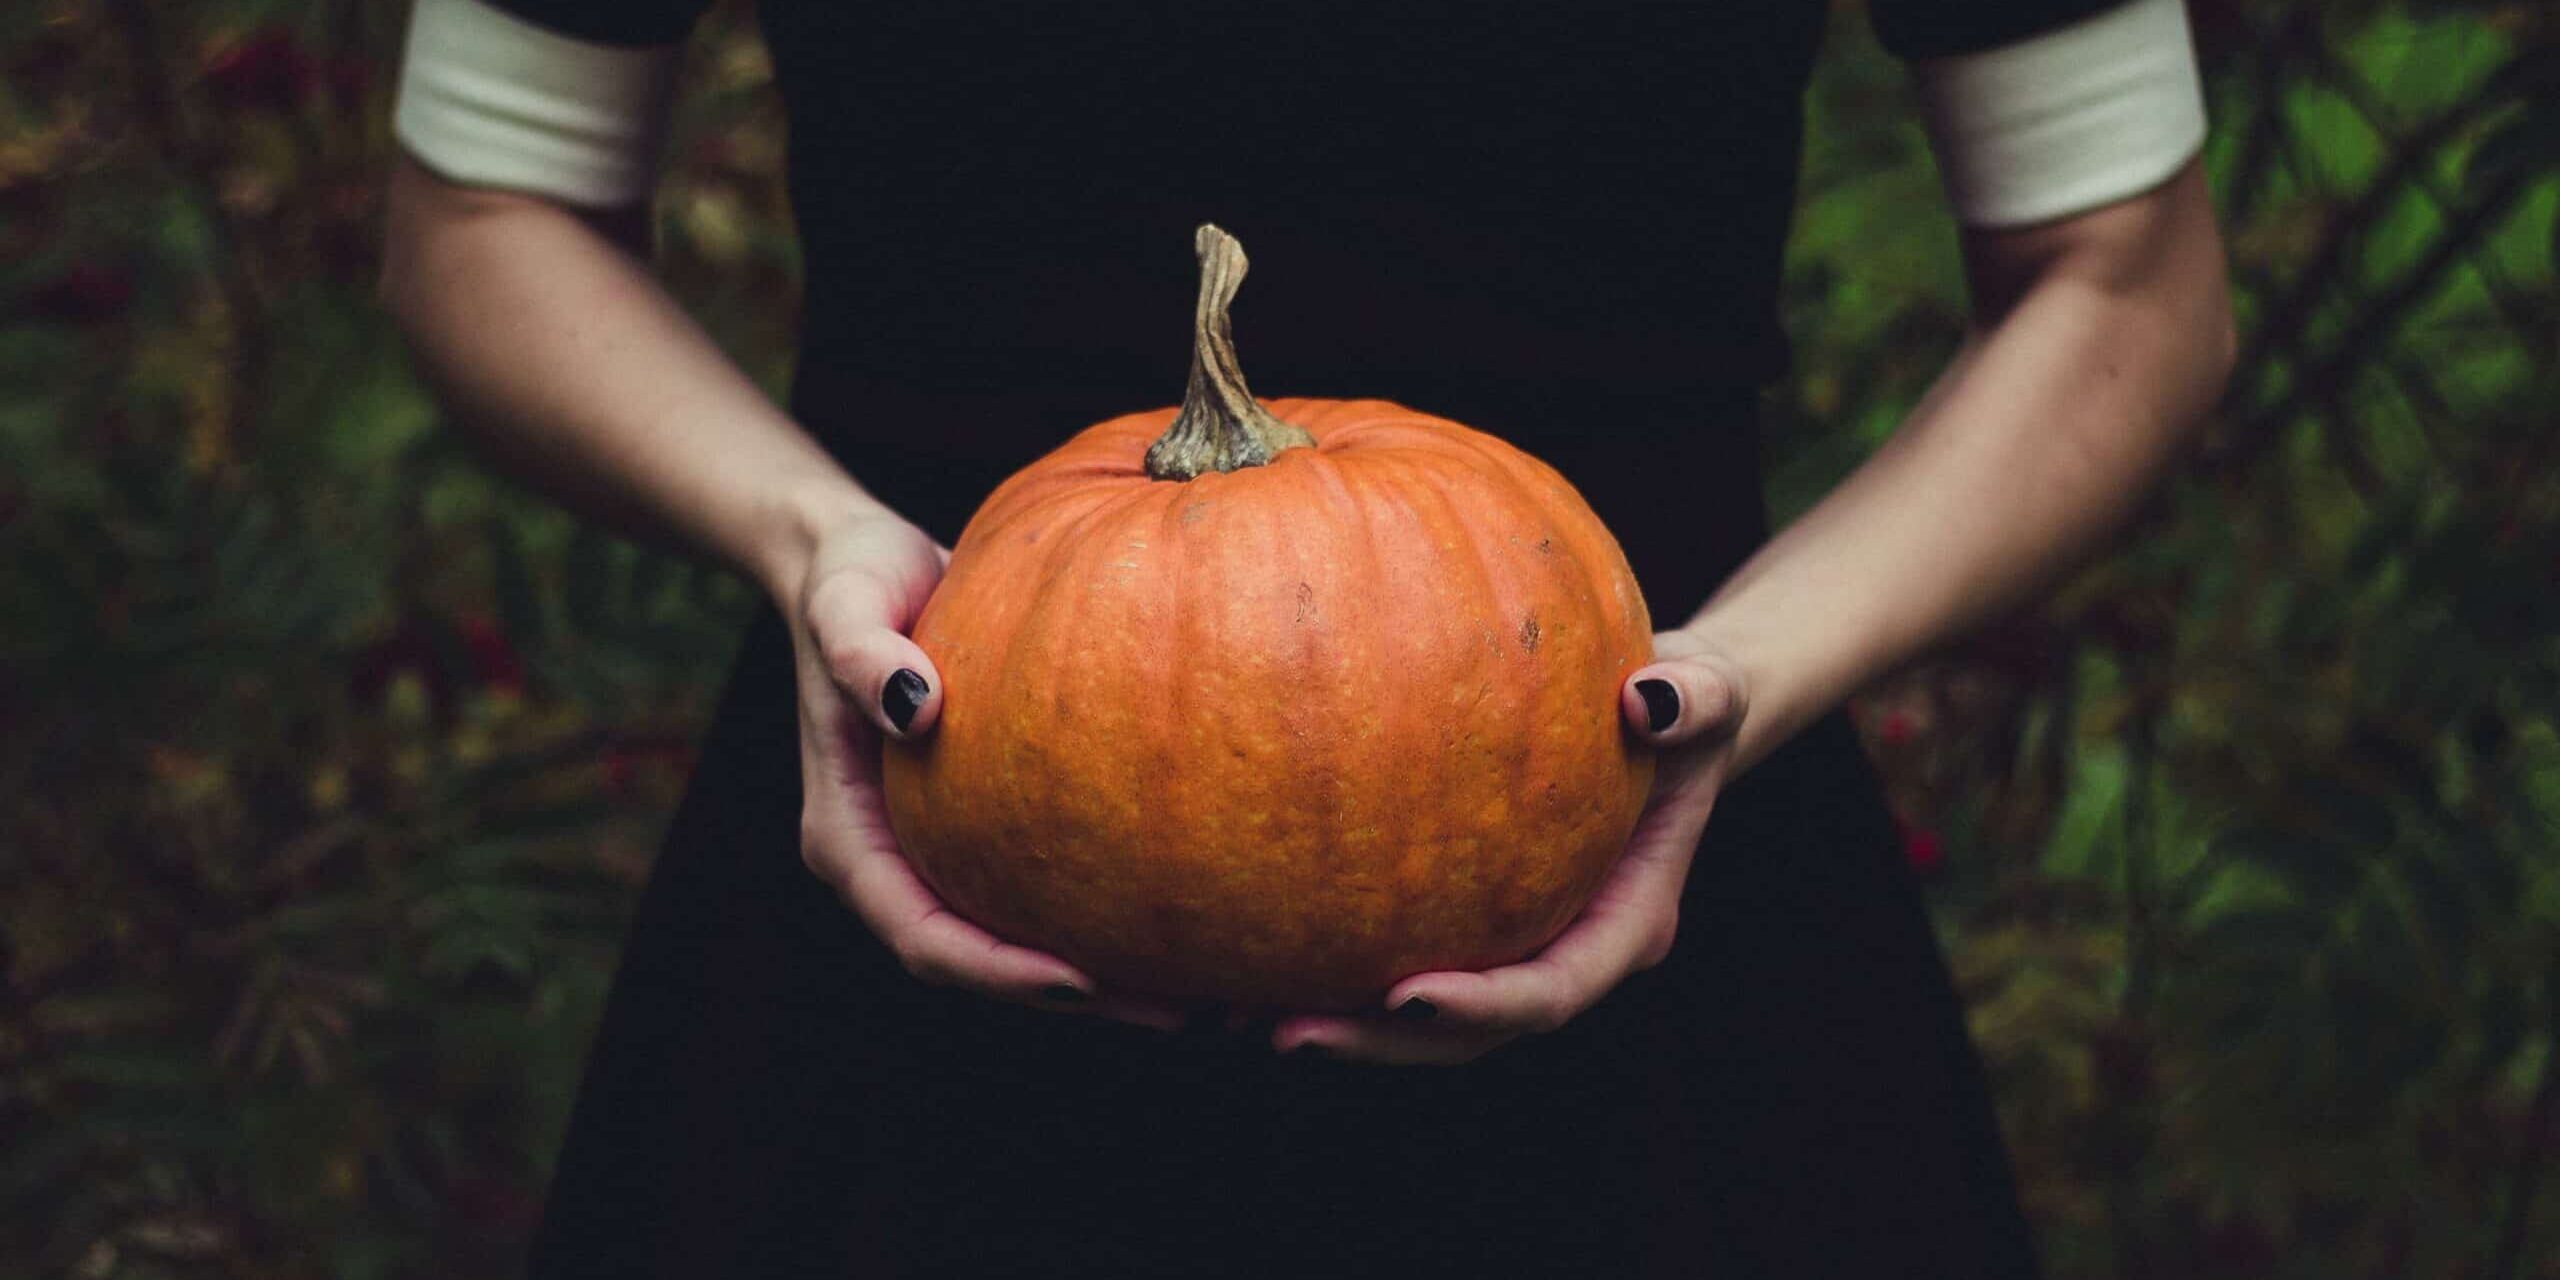 hallows-gala-roytal-free-image-full-res-by-pexels